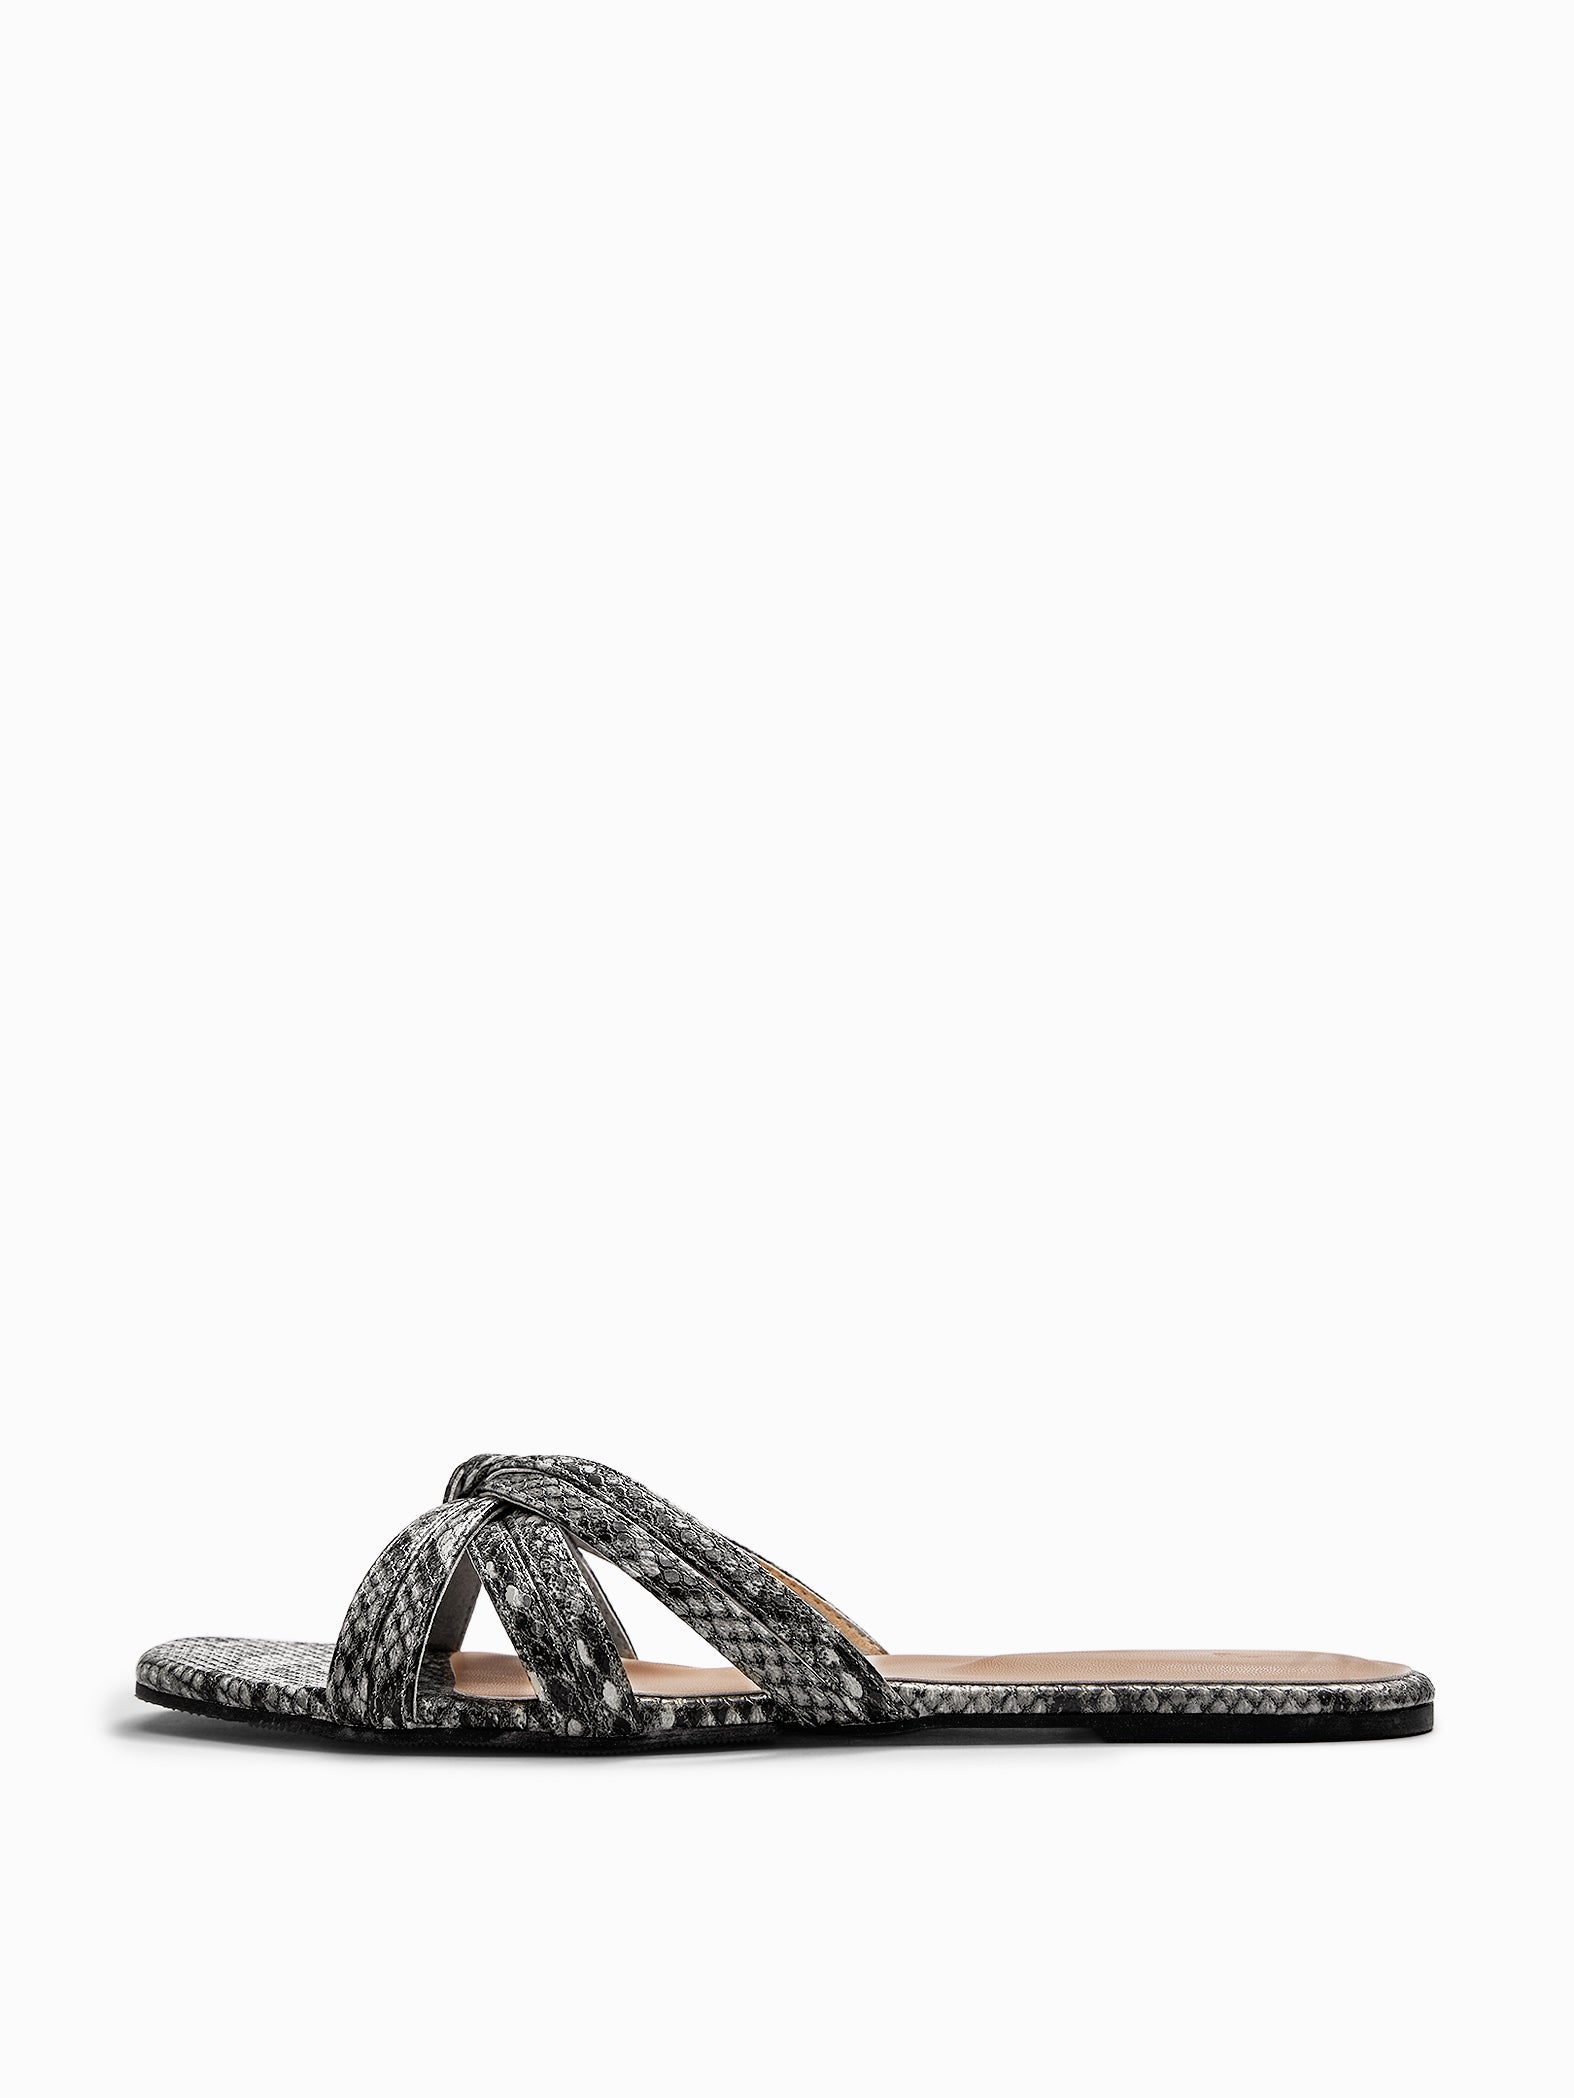 Monochrome Knotted Textured Flats